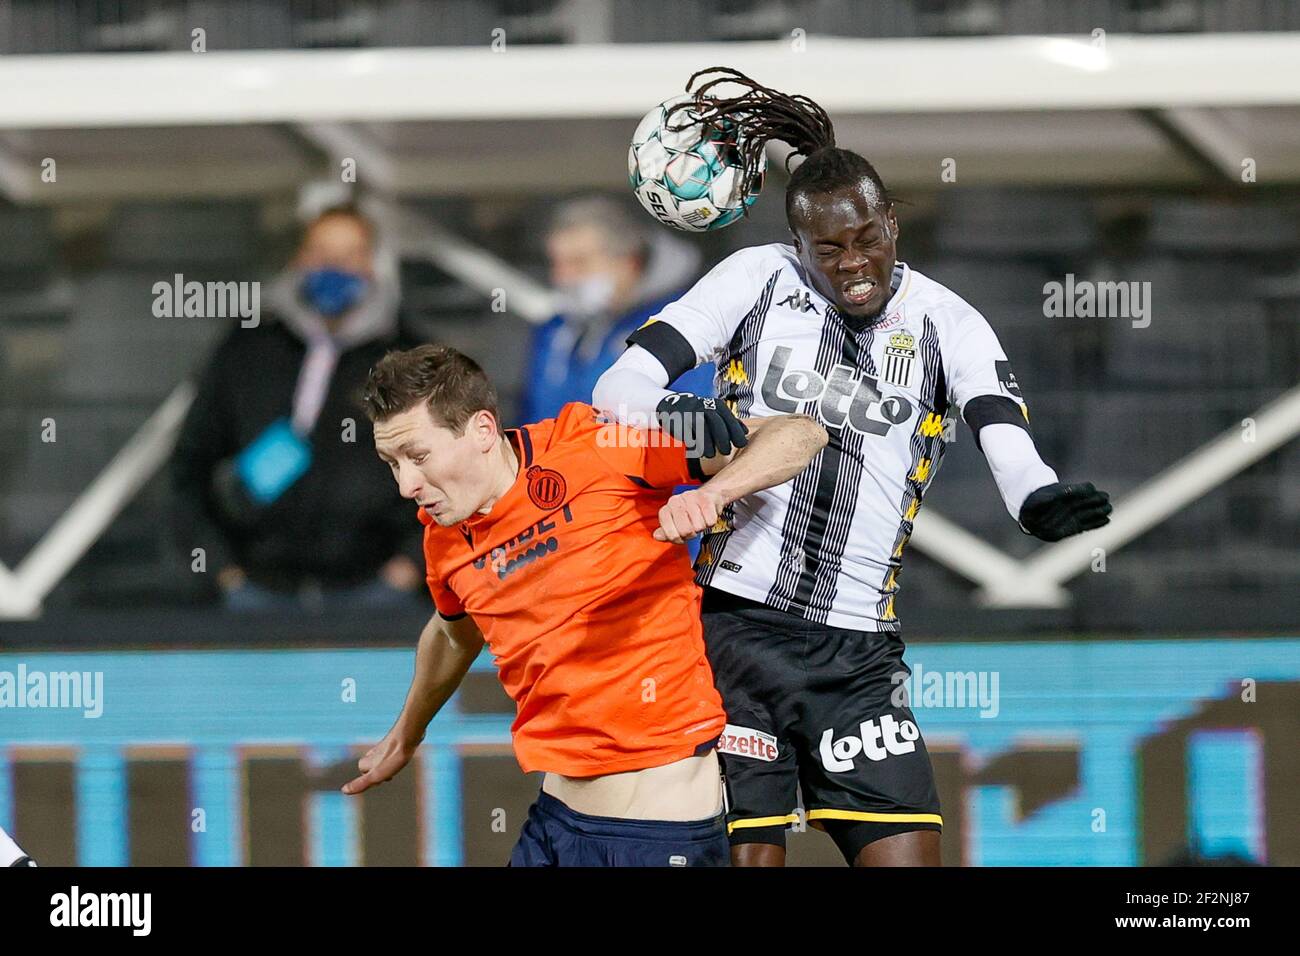 Club's Hans Vanaken and Charleroi's Mamadou Fall fight for the ball during a postponed soccer match between Sporting Charleroi and Club Brugge KV, Fri Stock Photo